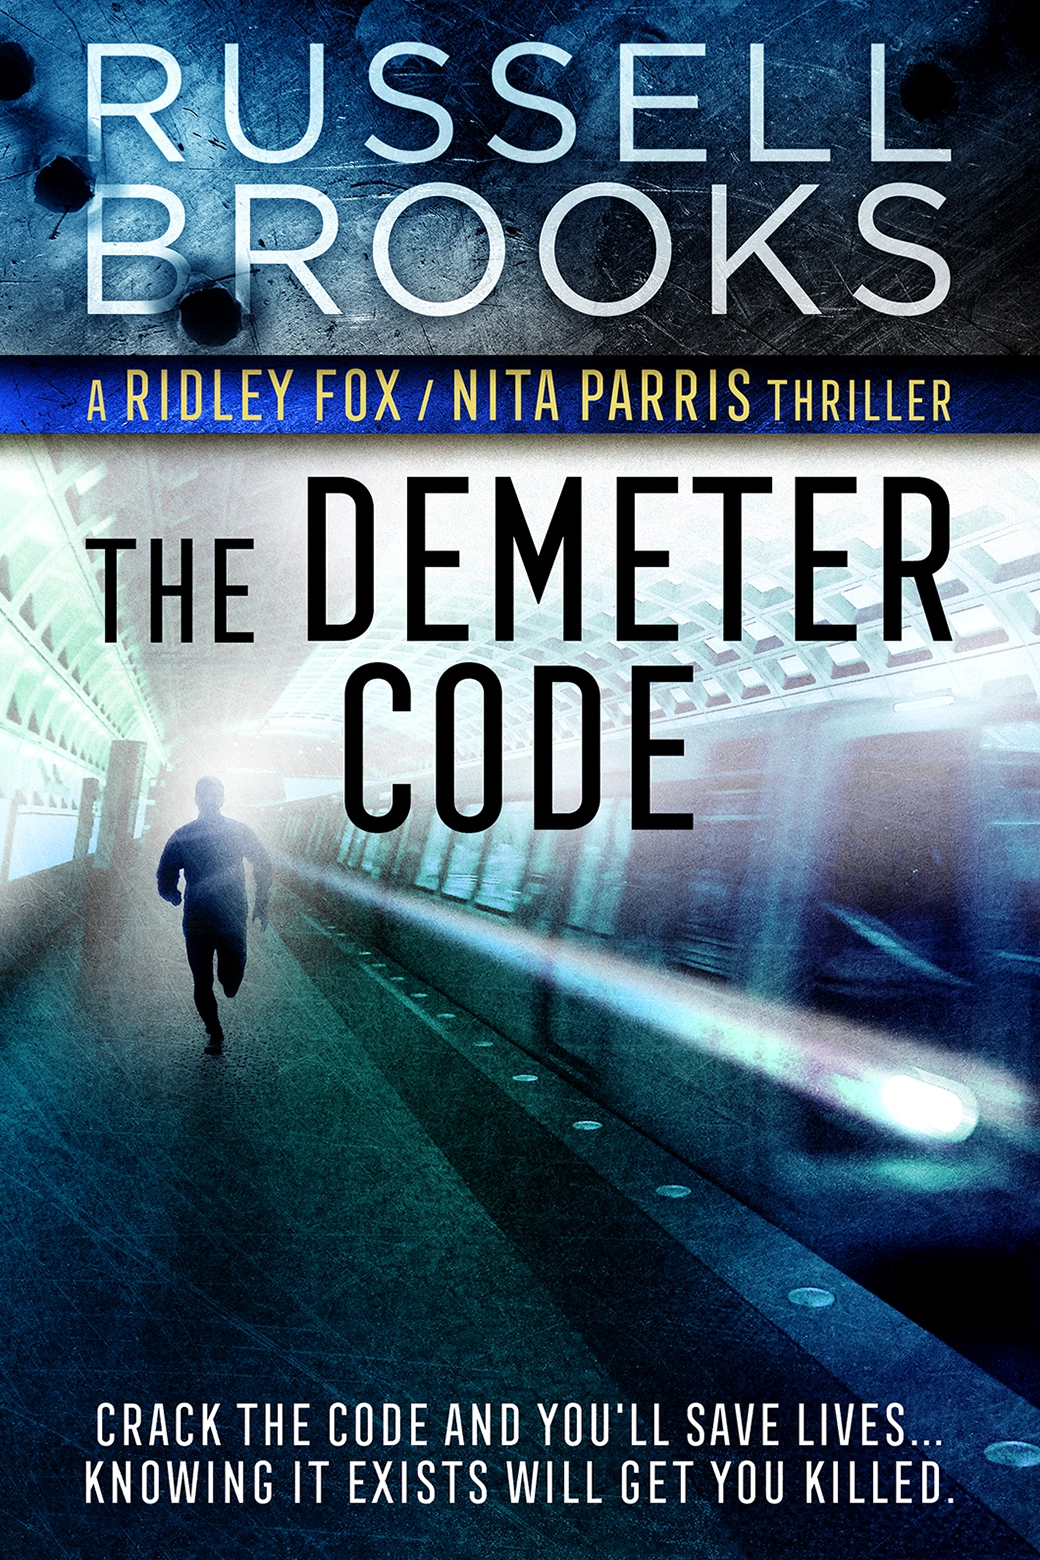 Buy The Demeter Code Now, The Demeter Code, books by Russell Brooks, biological thriller book, action adventure book, espionage book, books with Black protagonists, authors similar to Eric Jerome Dickie, crack the code, crack the code and, attack on American soil